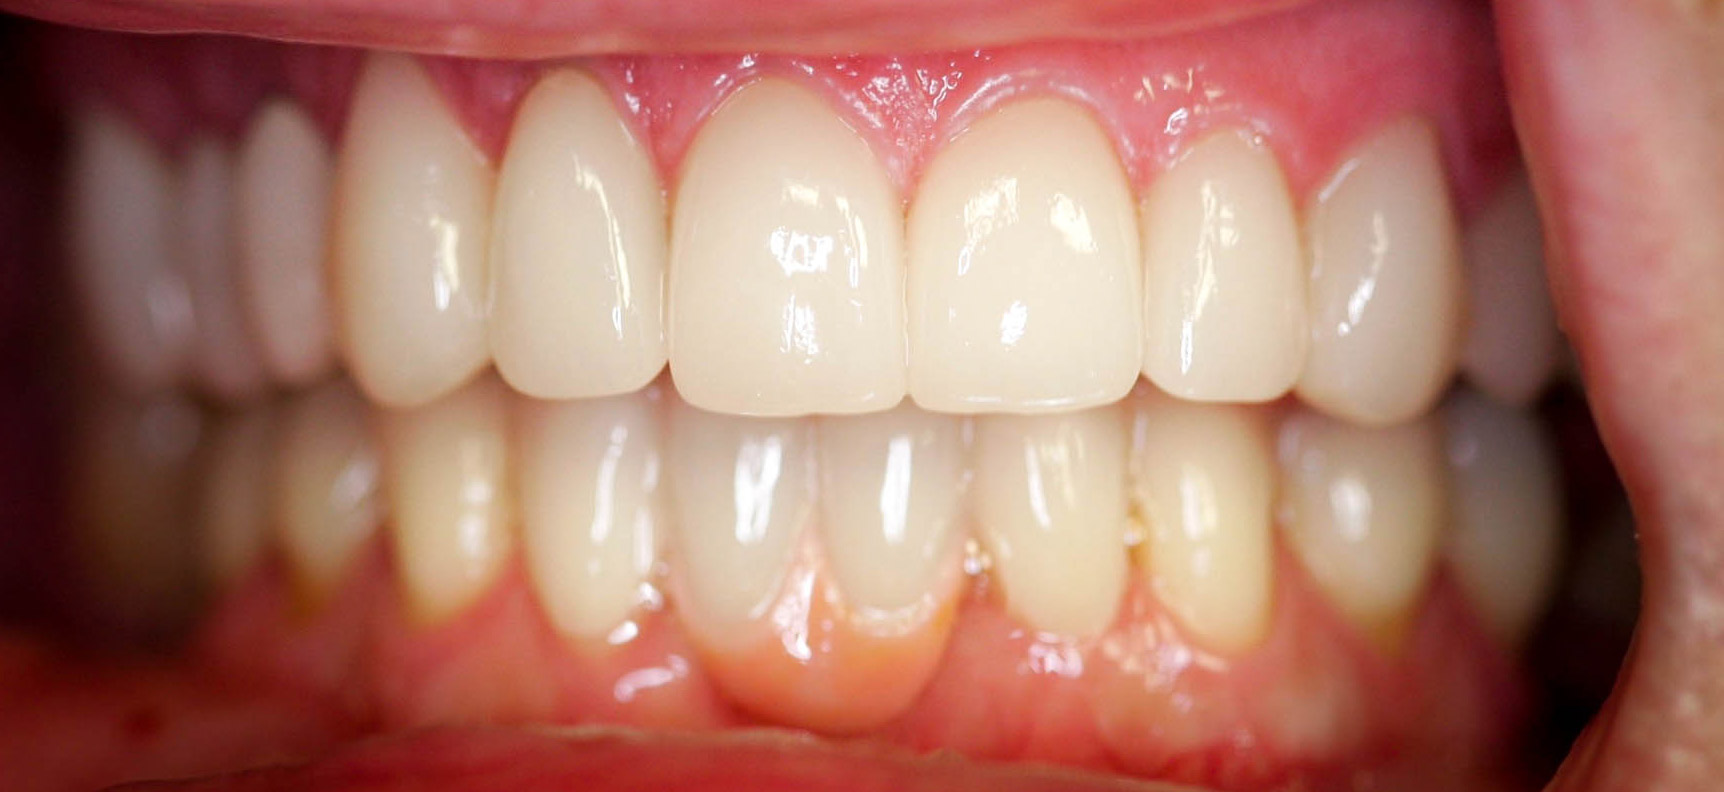 Esthetic makeover using veneers, crowns and bridges - the After photo